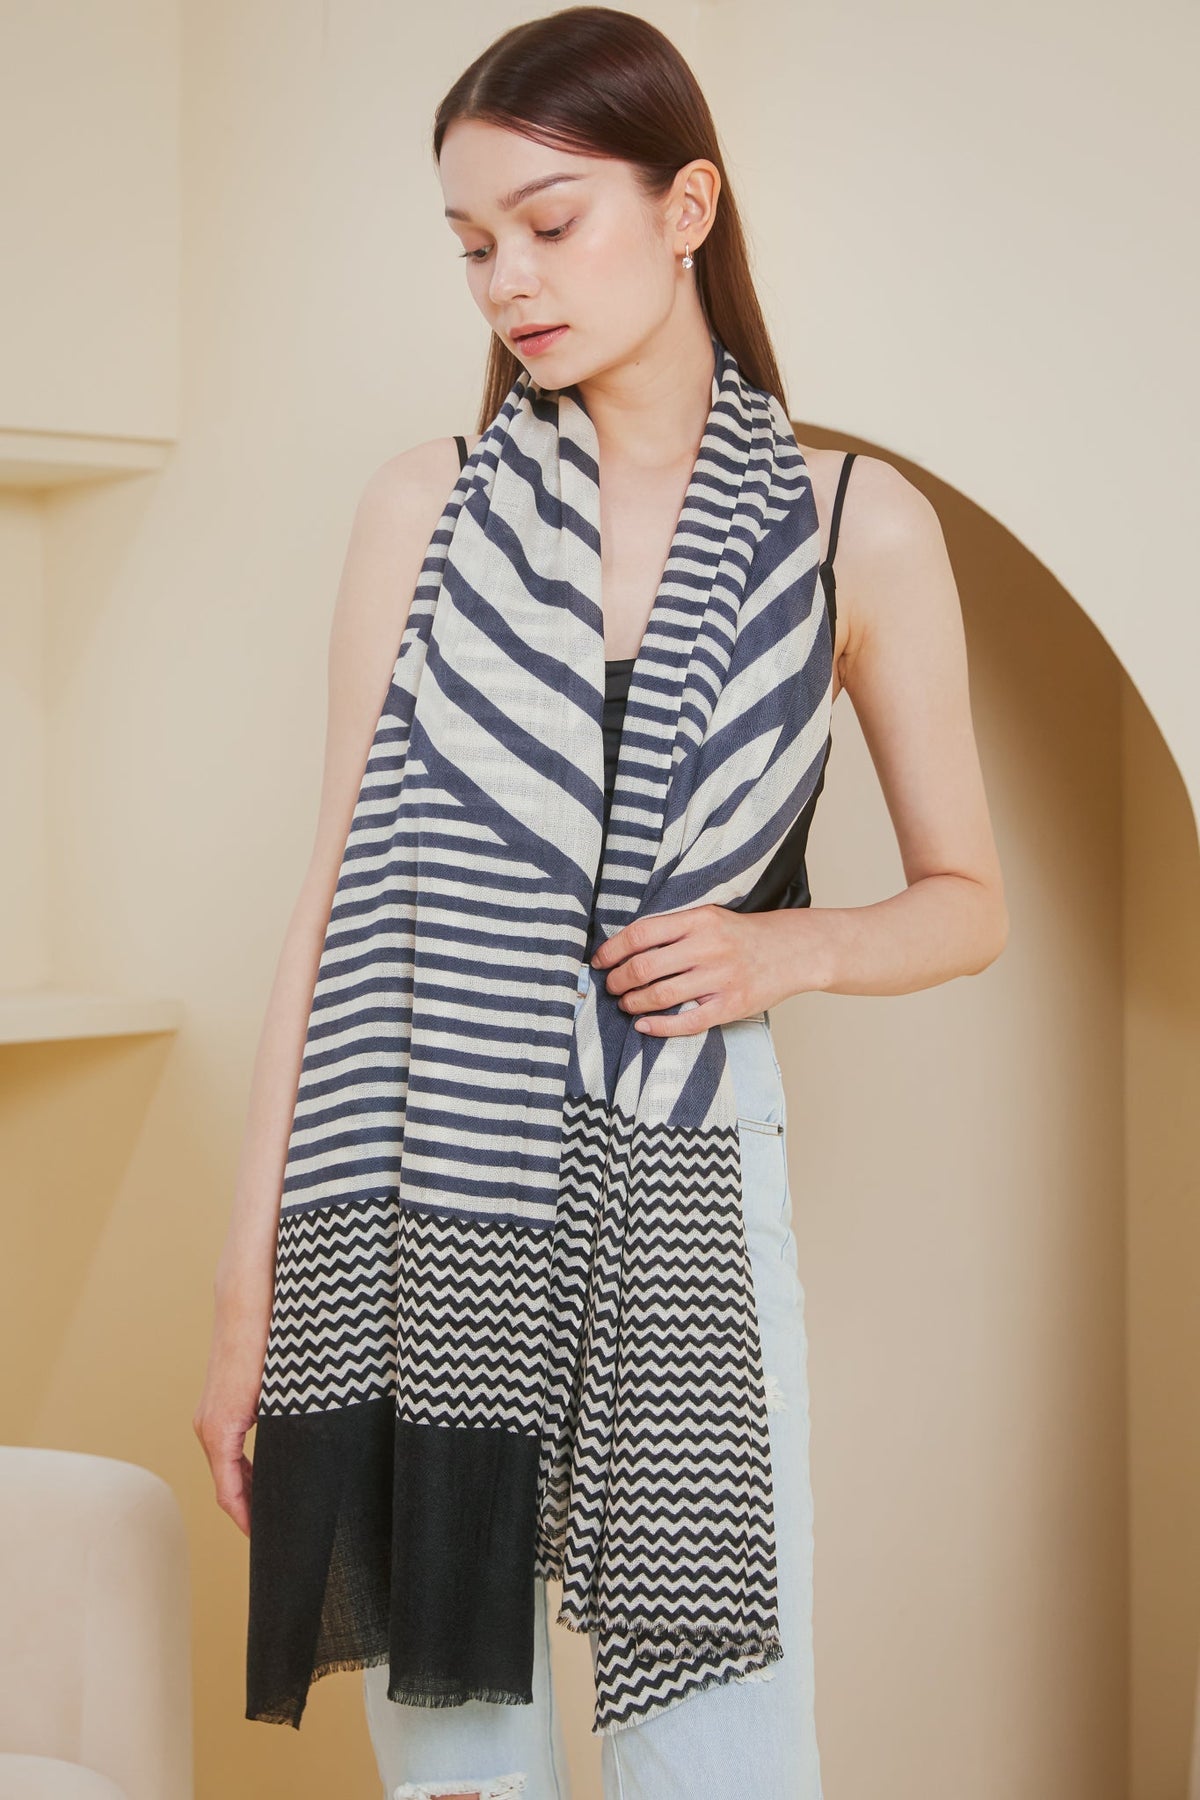 Restocked* Luxe Cashmere Shawl in Striped Navy